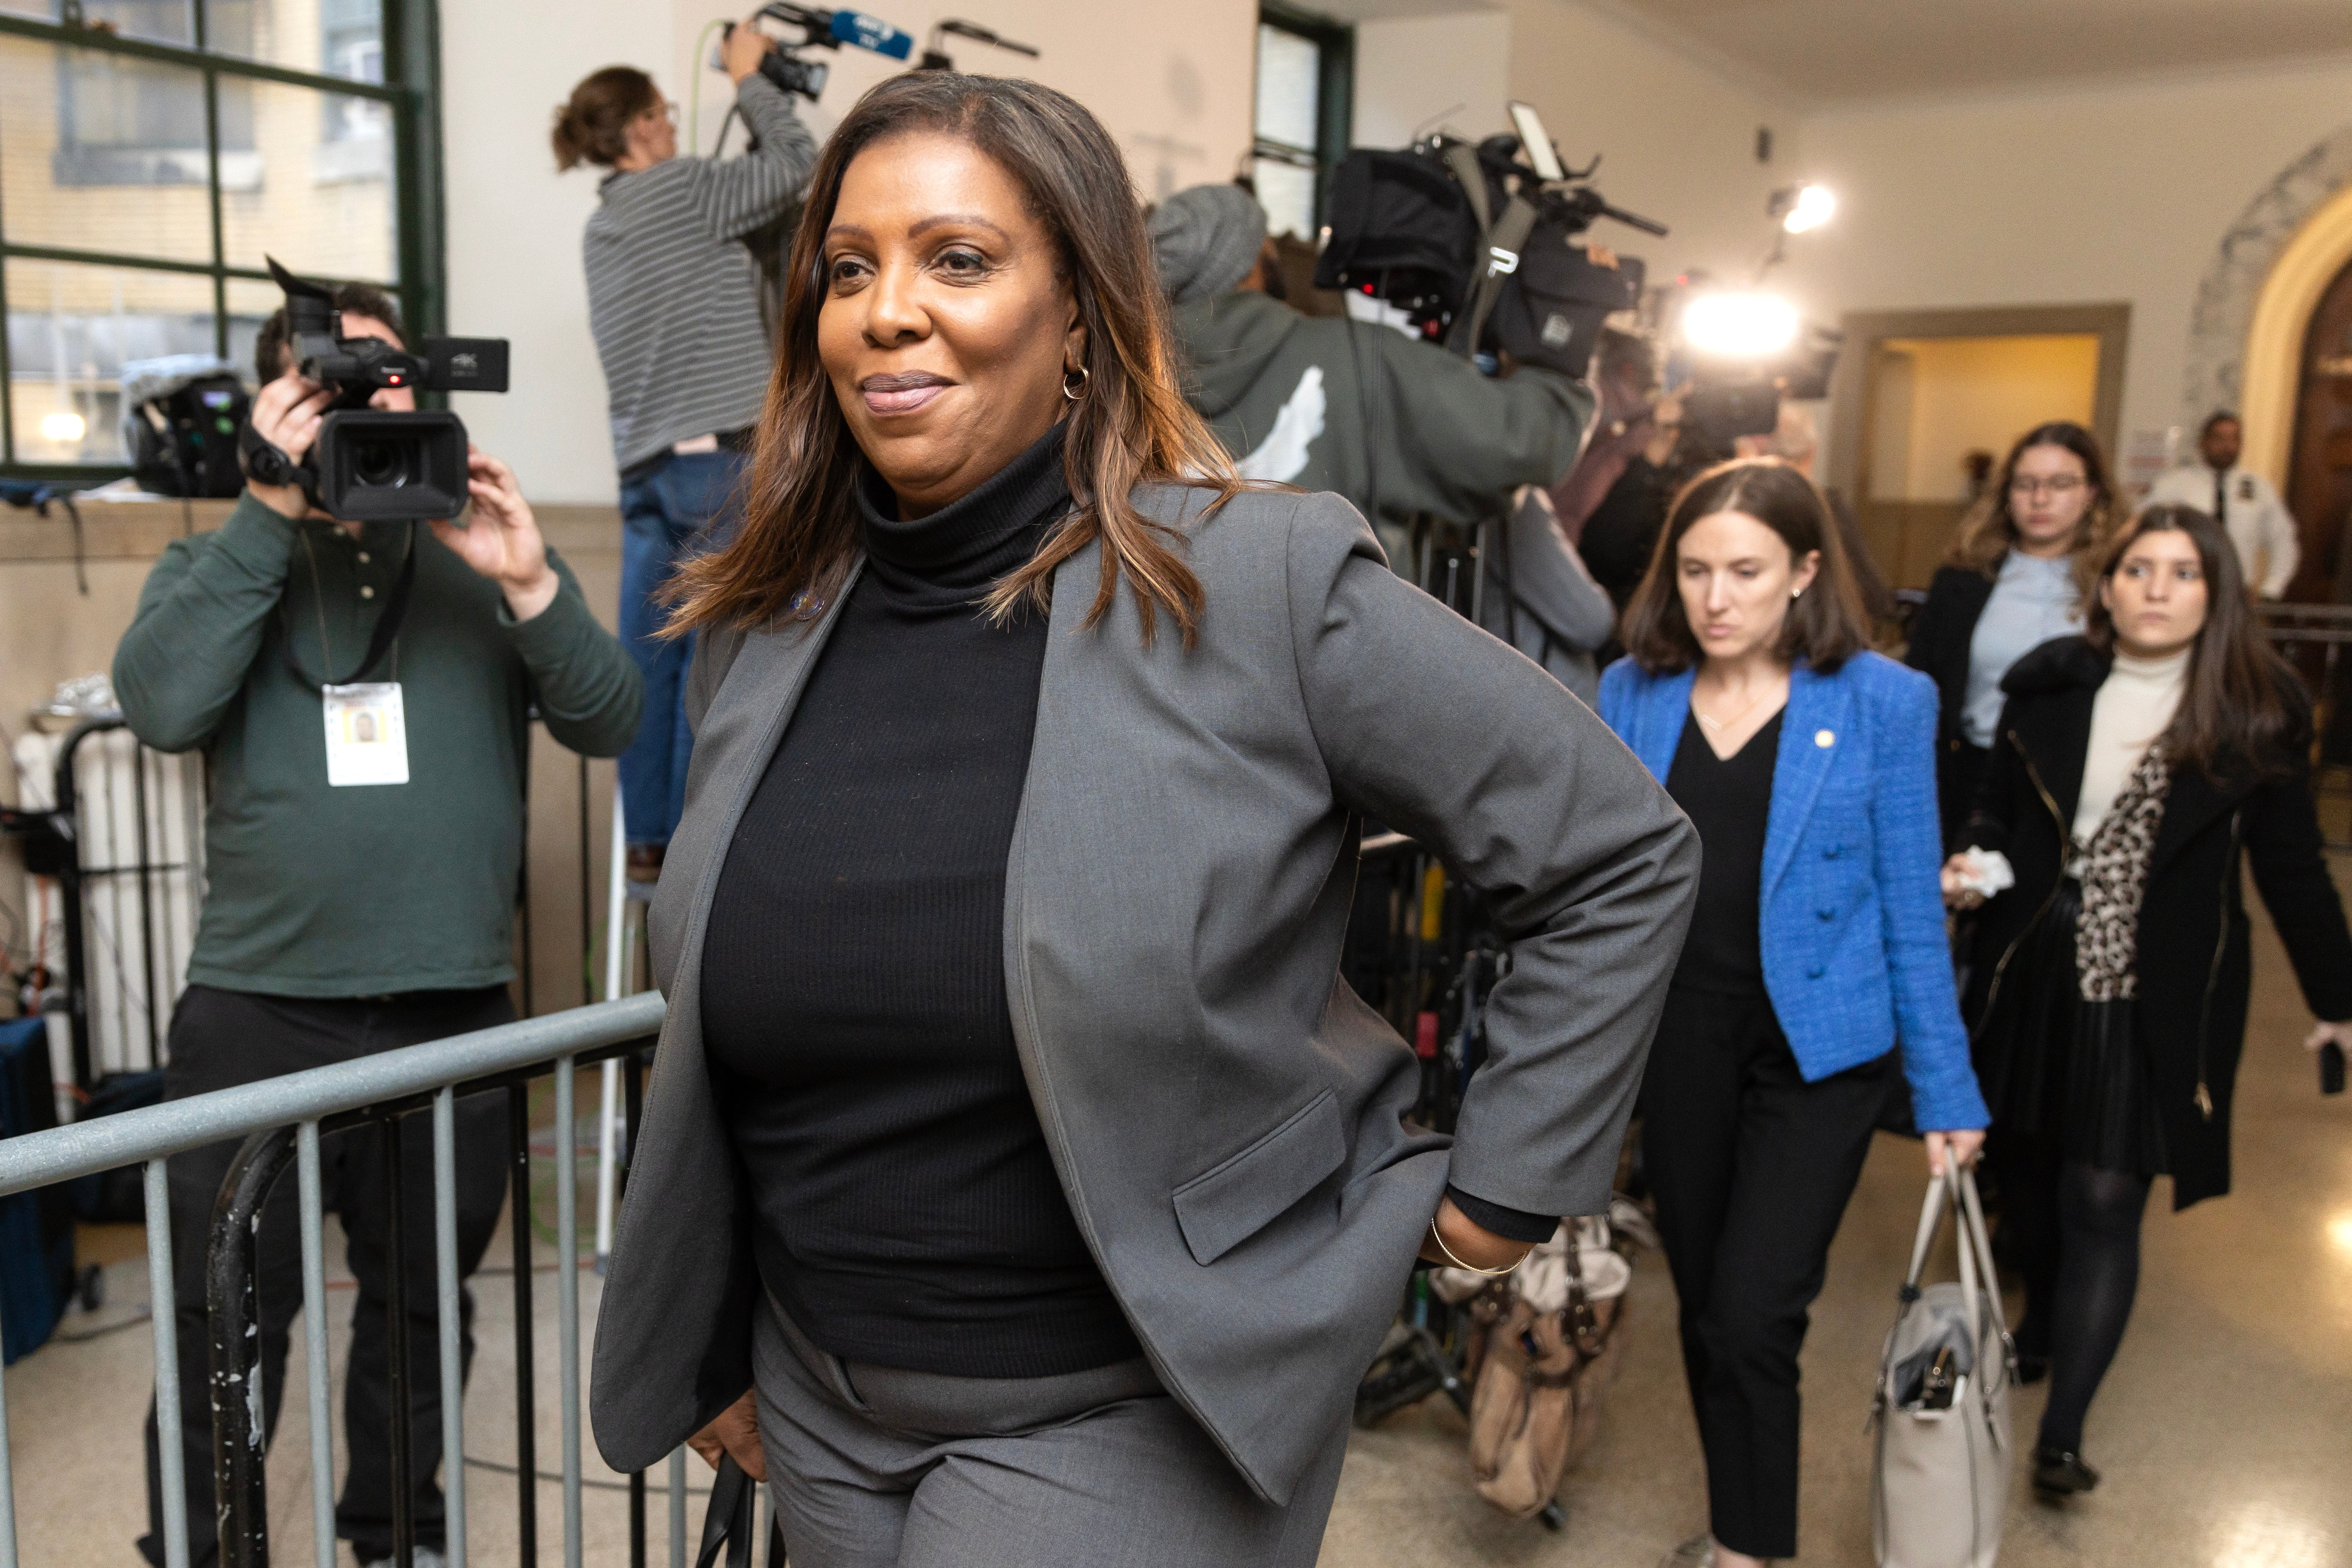 New York Attorney General Letitia James leaves Judge Arthur Engoron’s courtroom after hearing testimony from Donald Trump Jr on 1 November